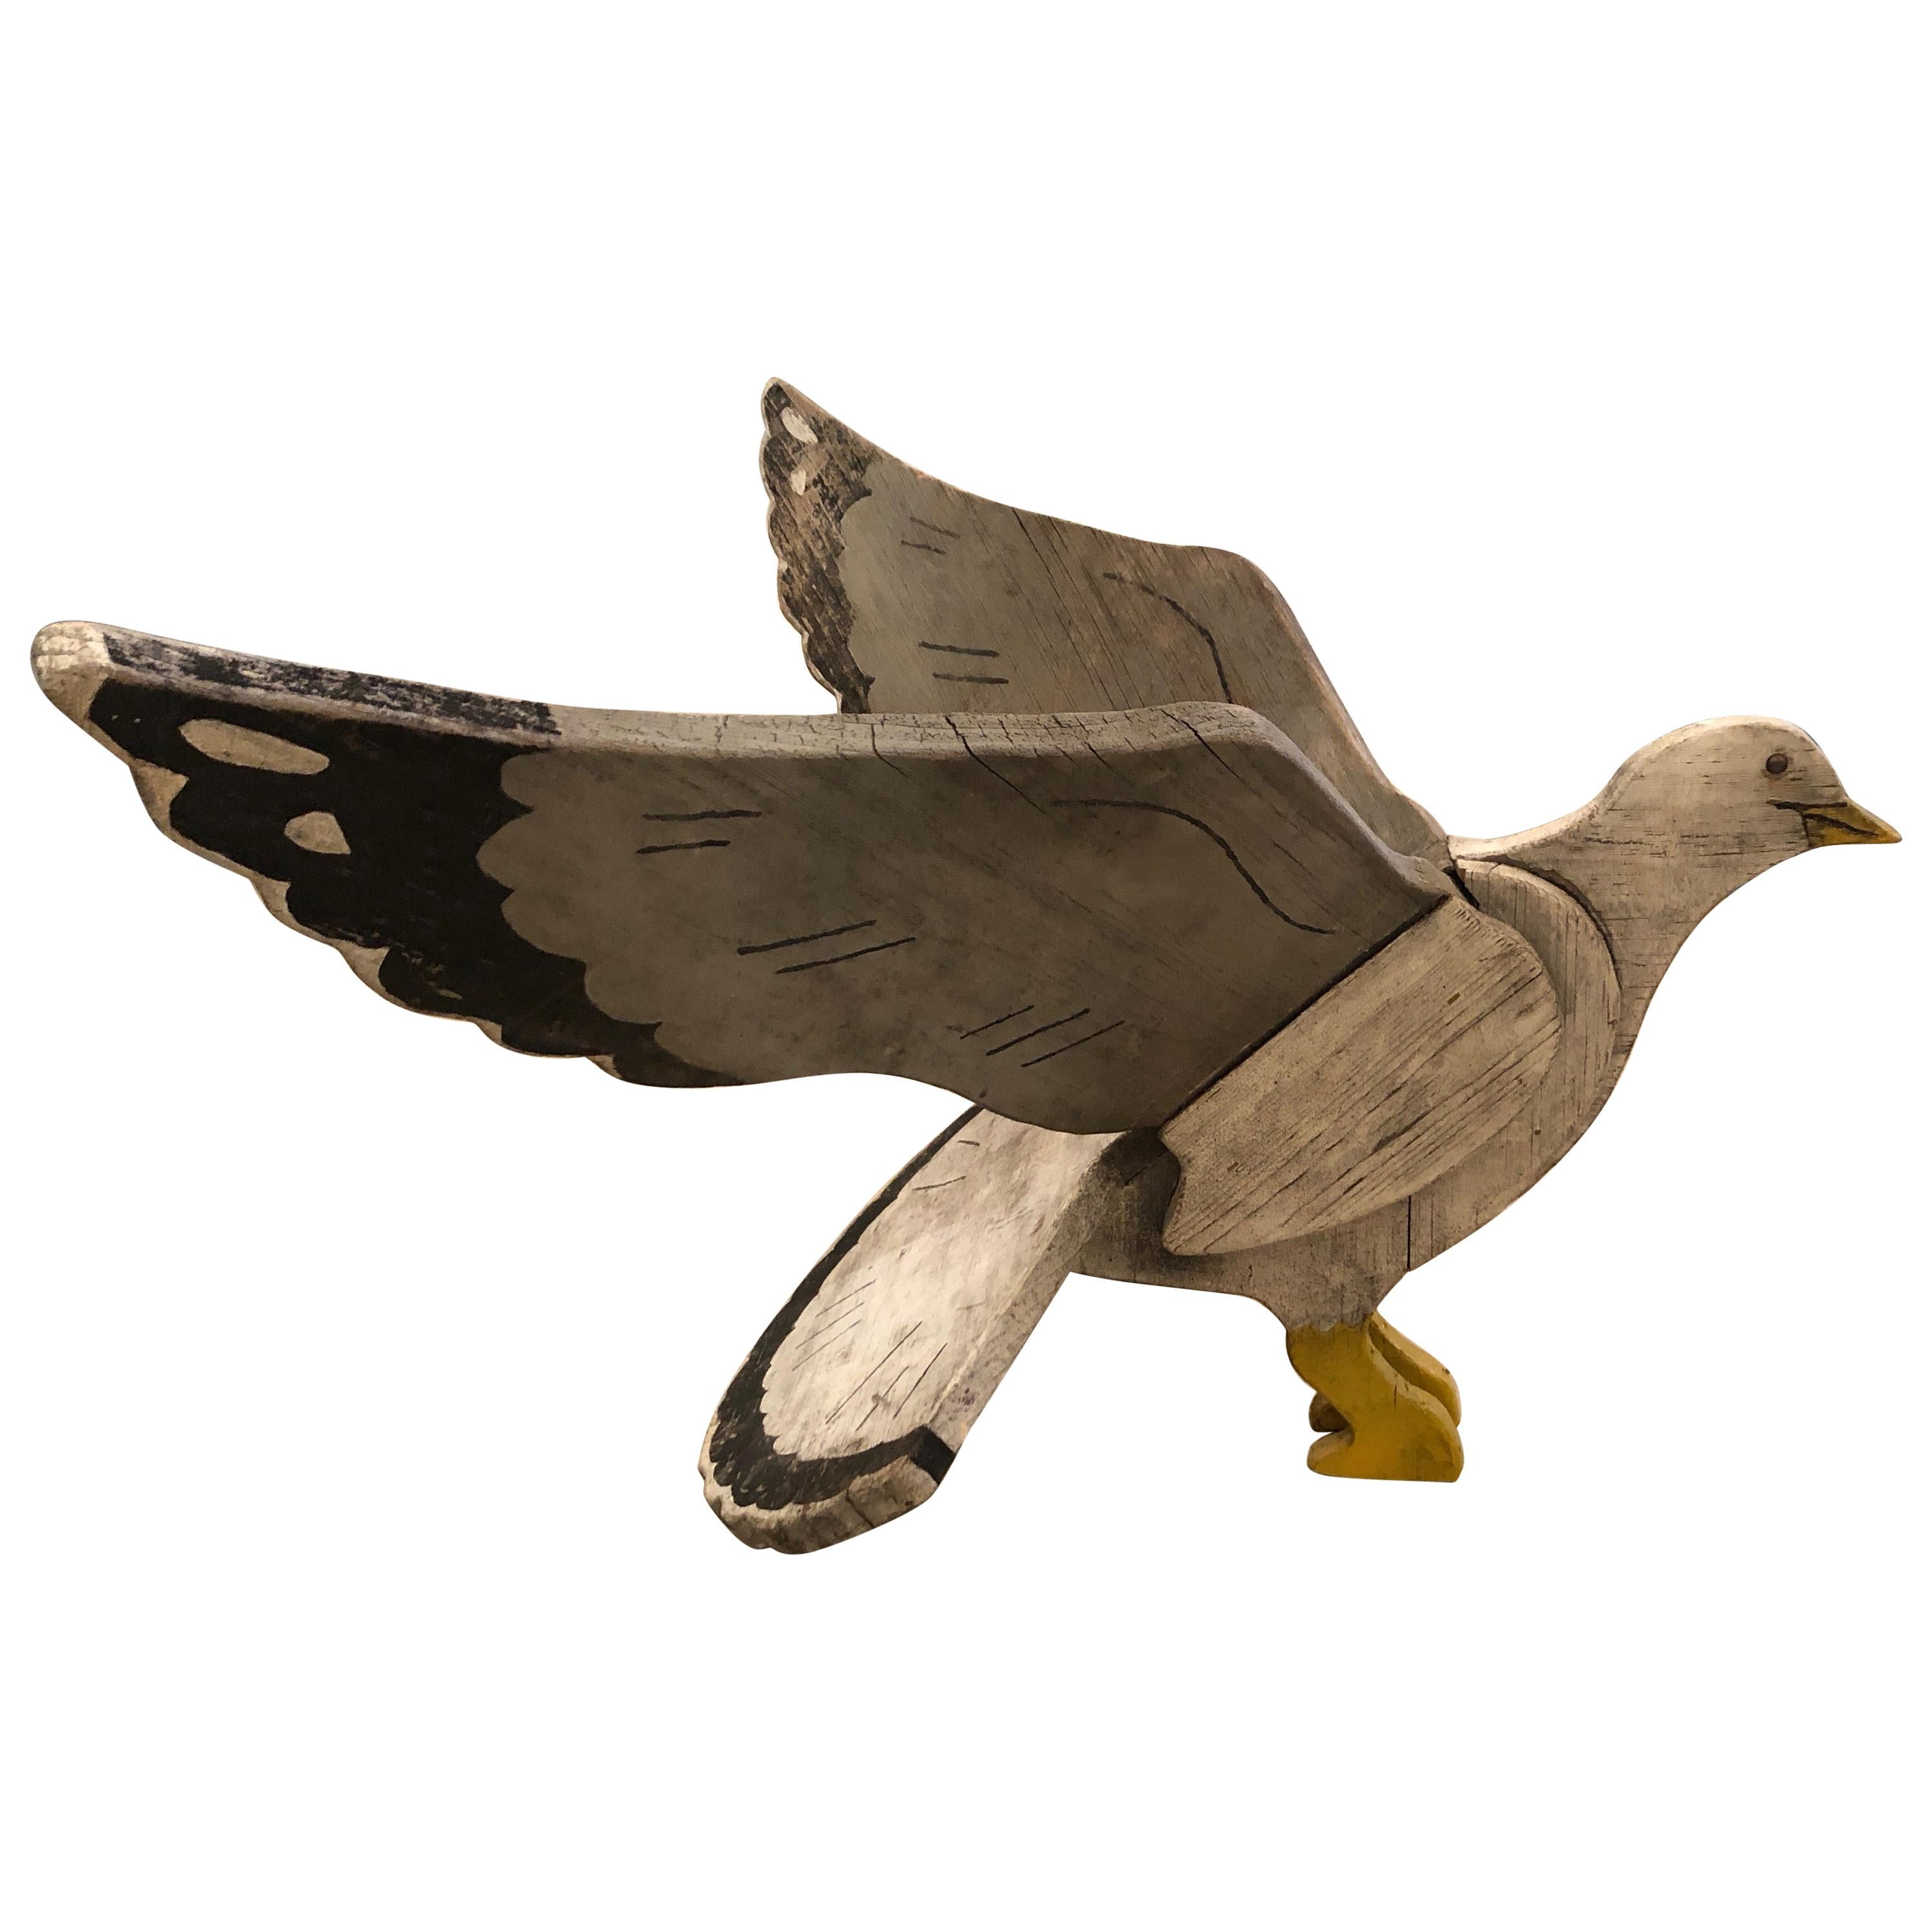 Fantastic Nantucket Hand Carved and Painted Folk Art Seagull Sculpture